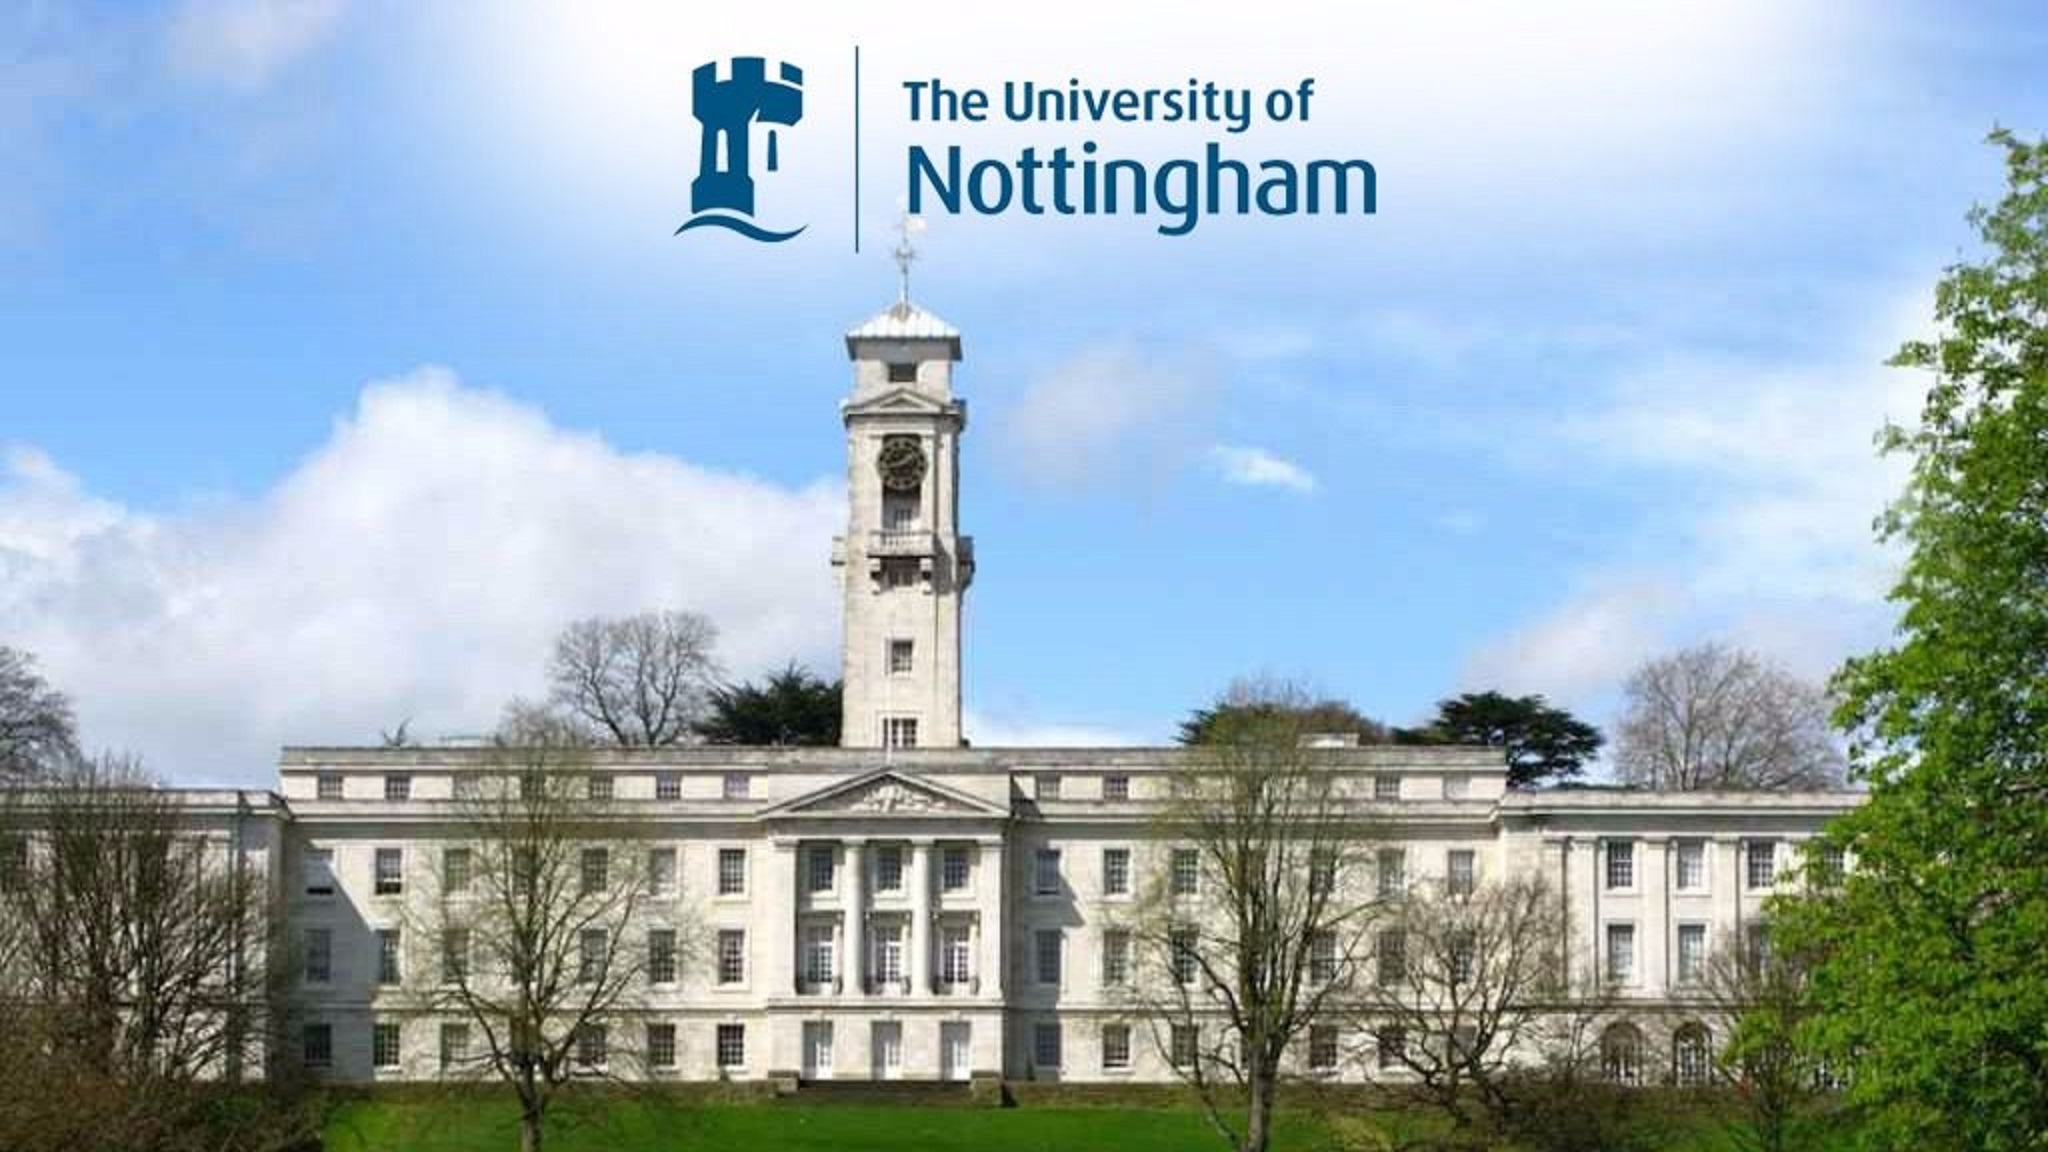 extension to thesis pending university of nottingham